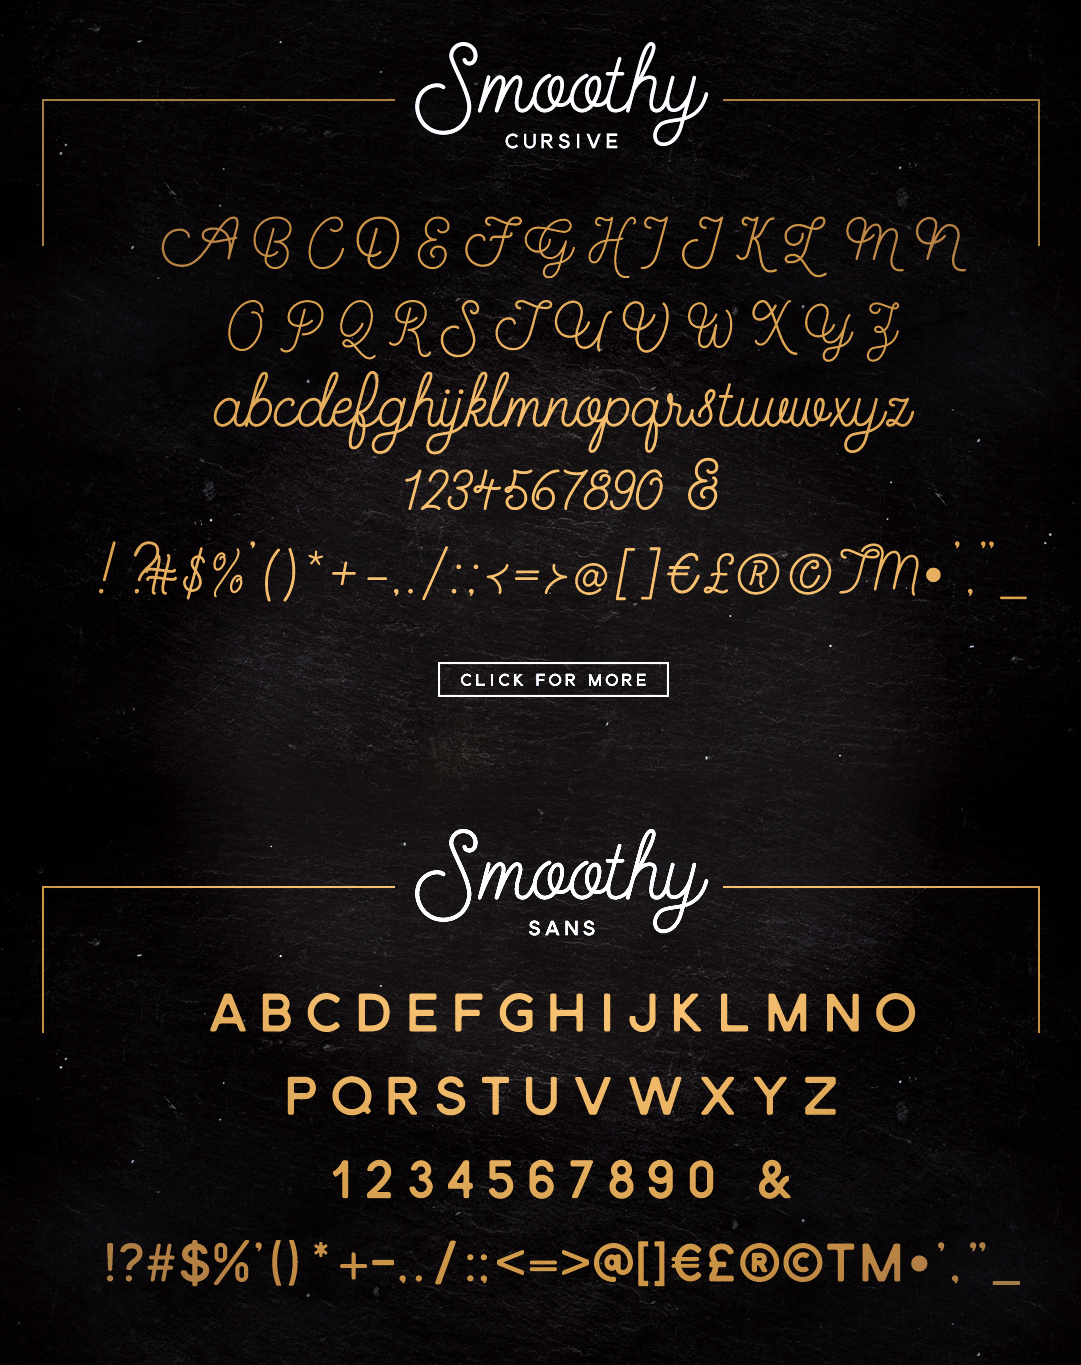 Smoothy-font-by-Ian-Barnard-of-Vintage-Design-Co